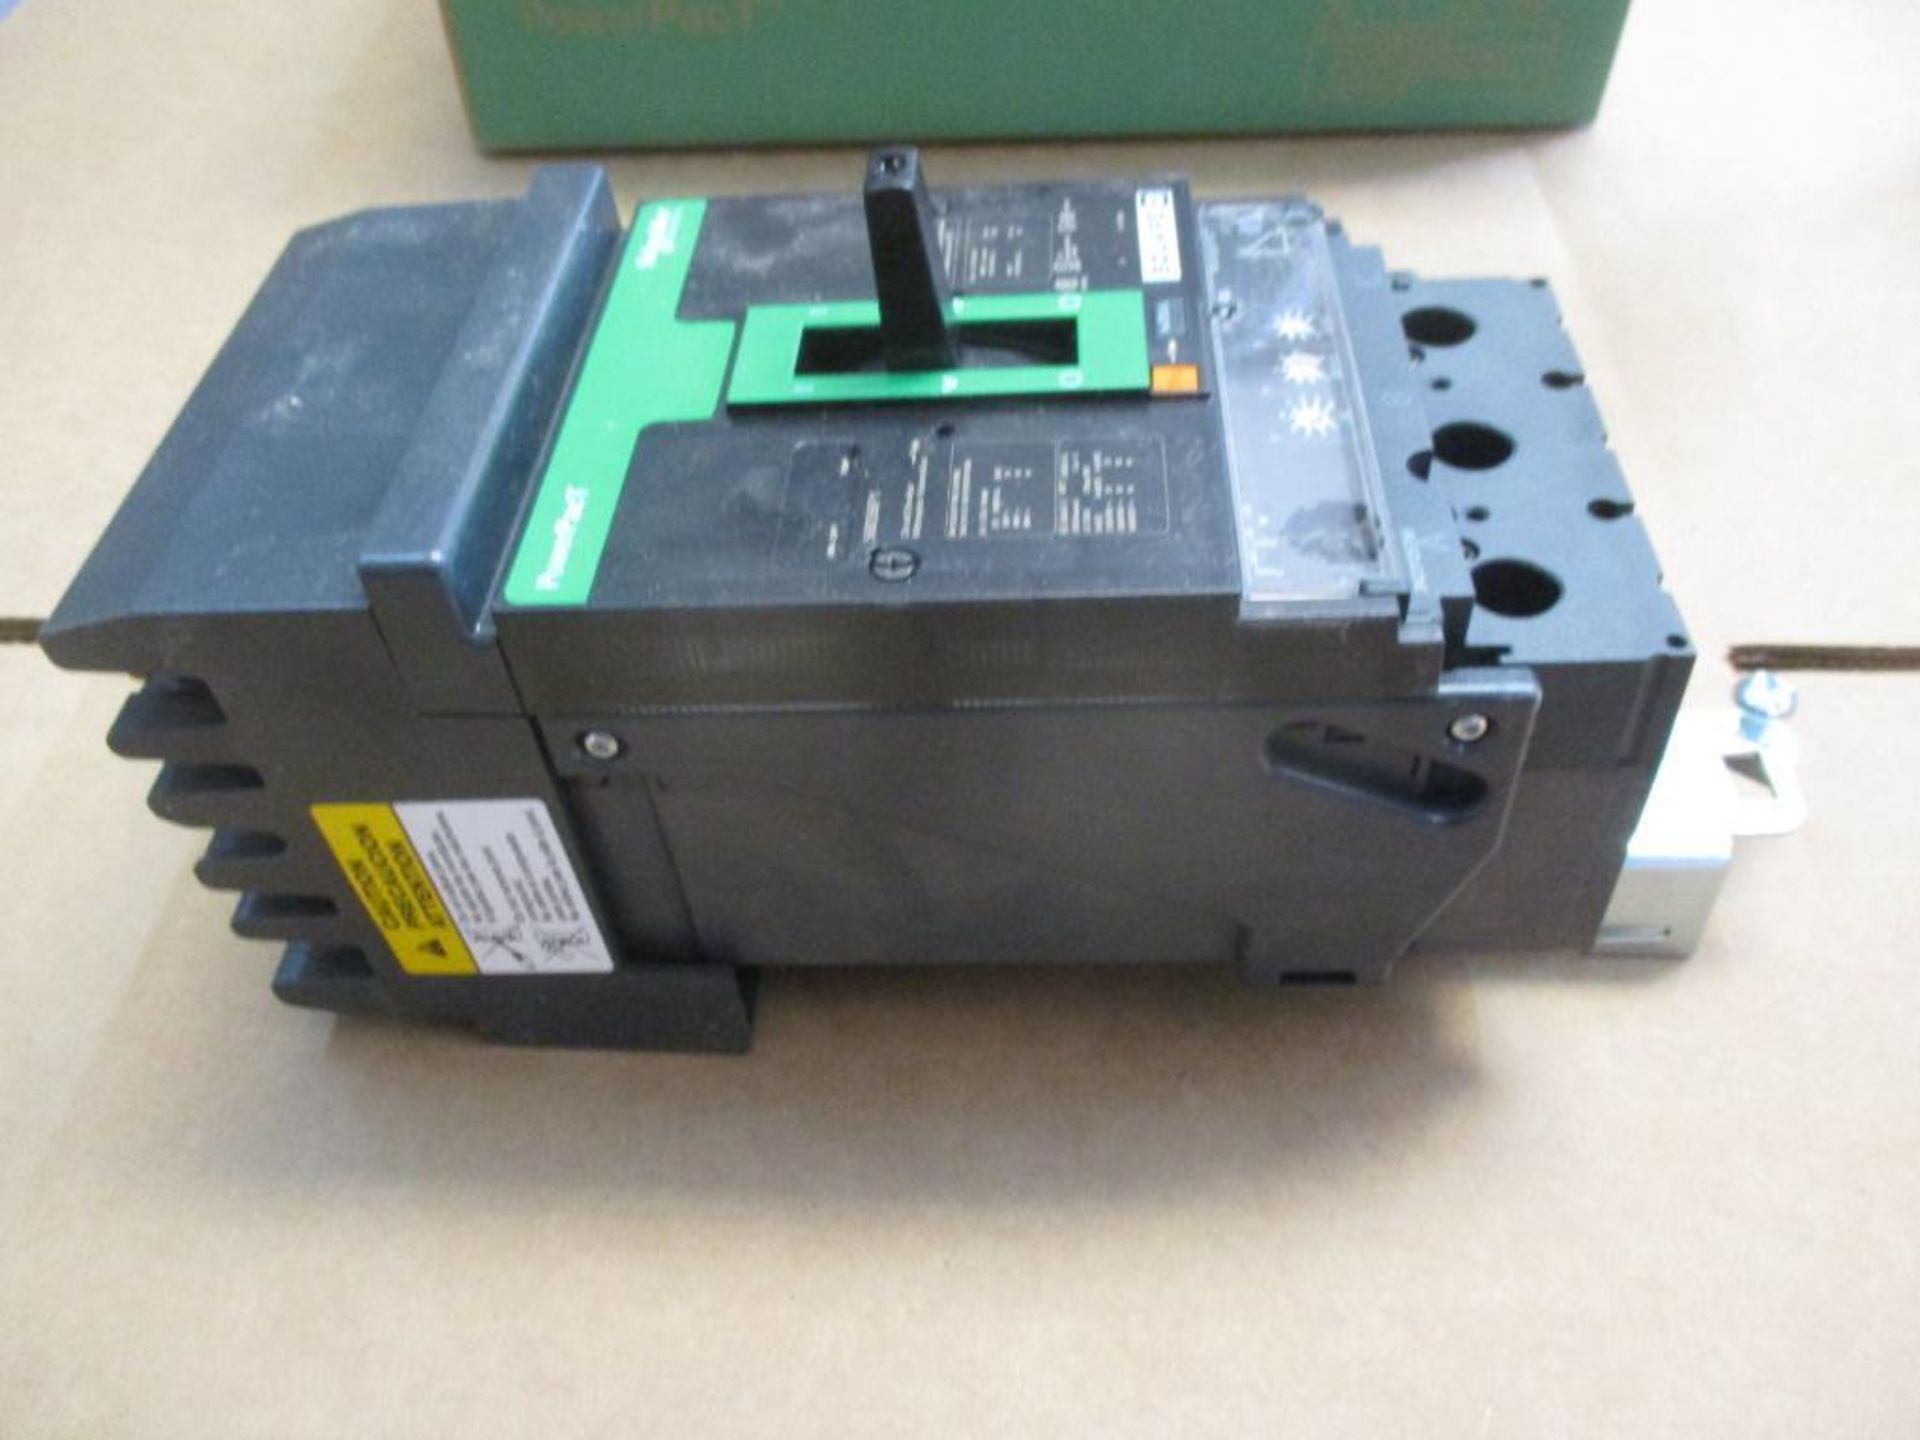 Square D 250 AMP Circuit Breaker, 568356P1, 3P, 250A, 600VAC, PowerPacT (New in Box) - Image 3 of 4